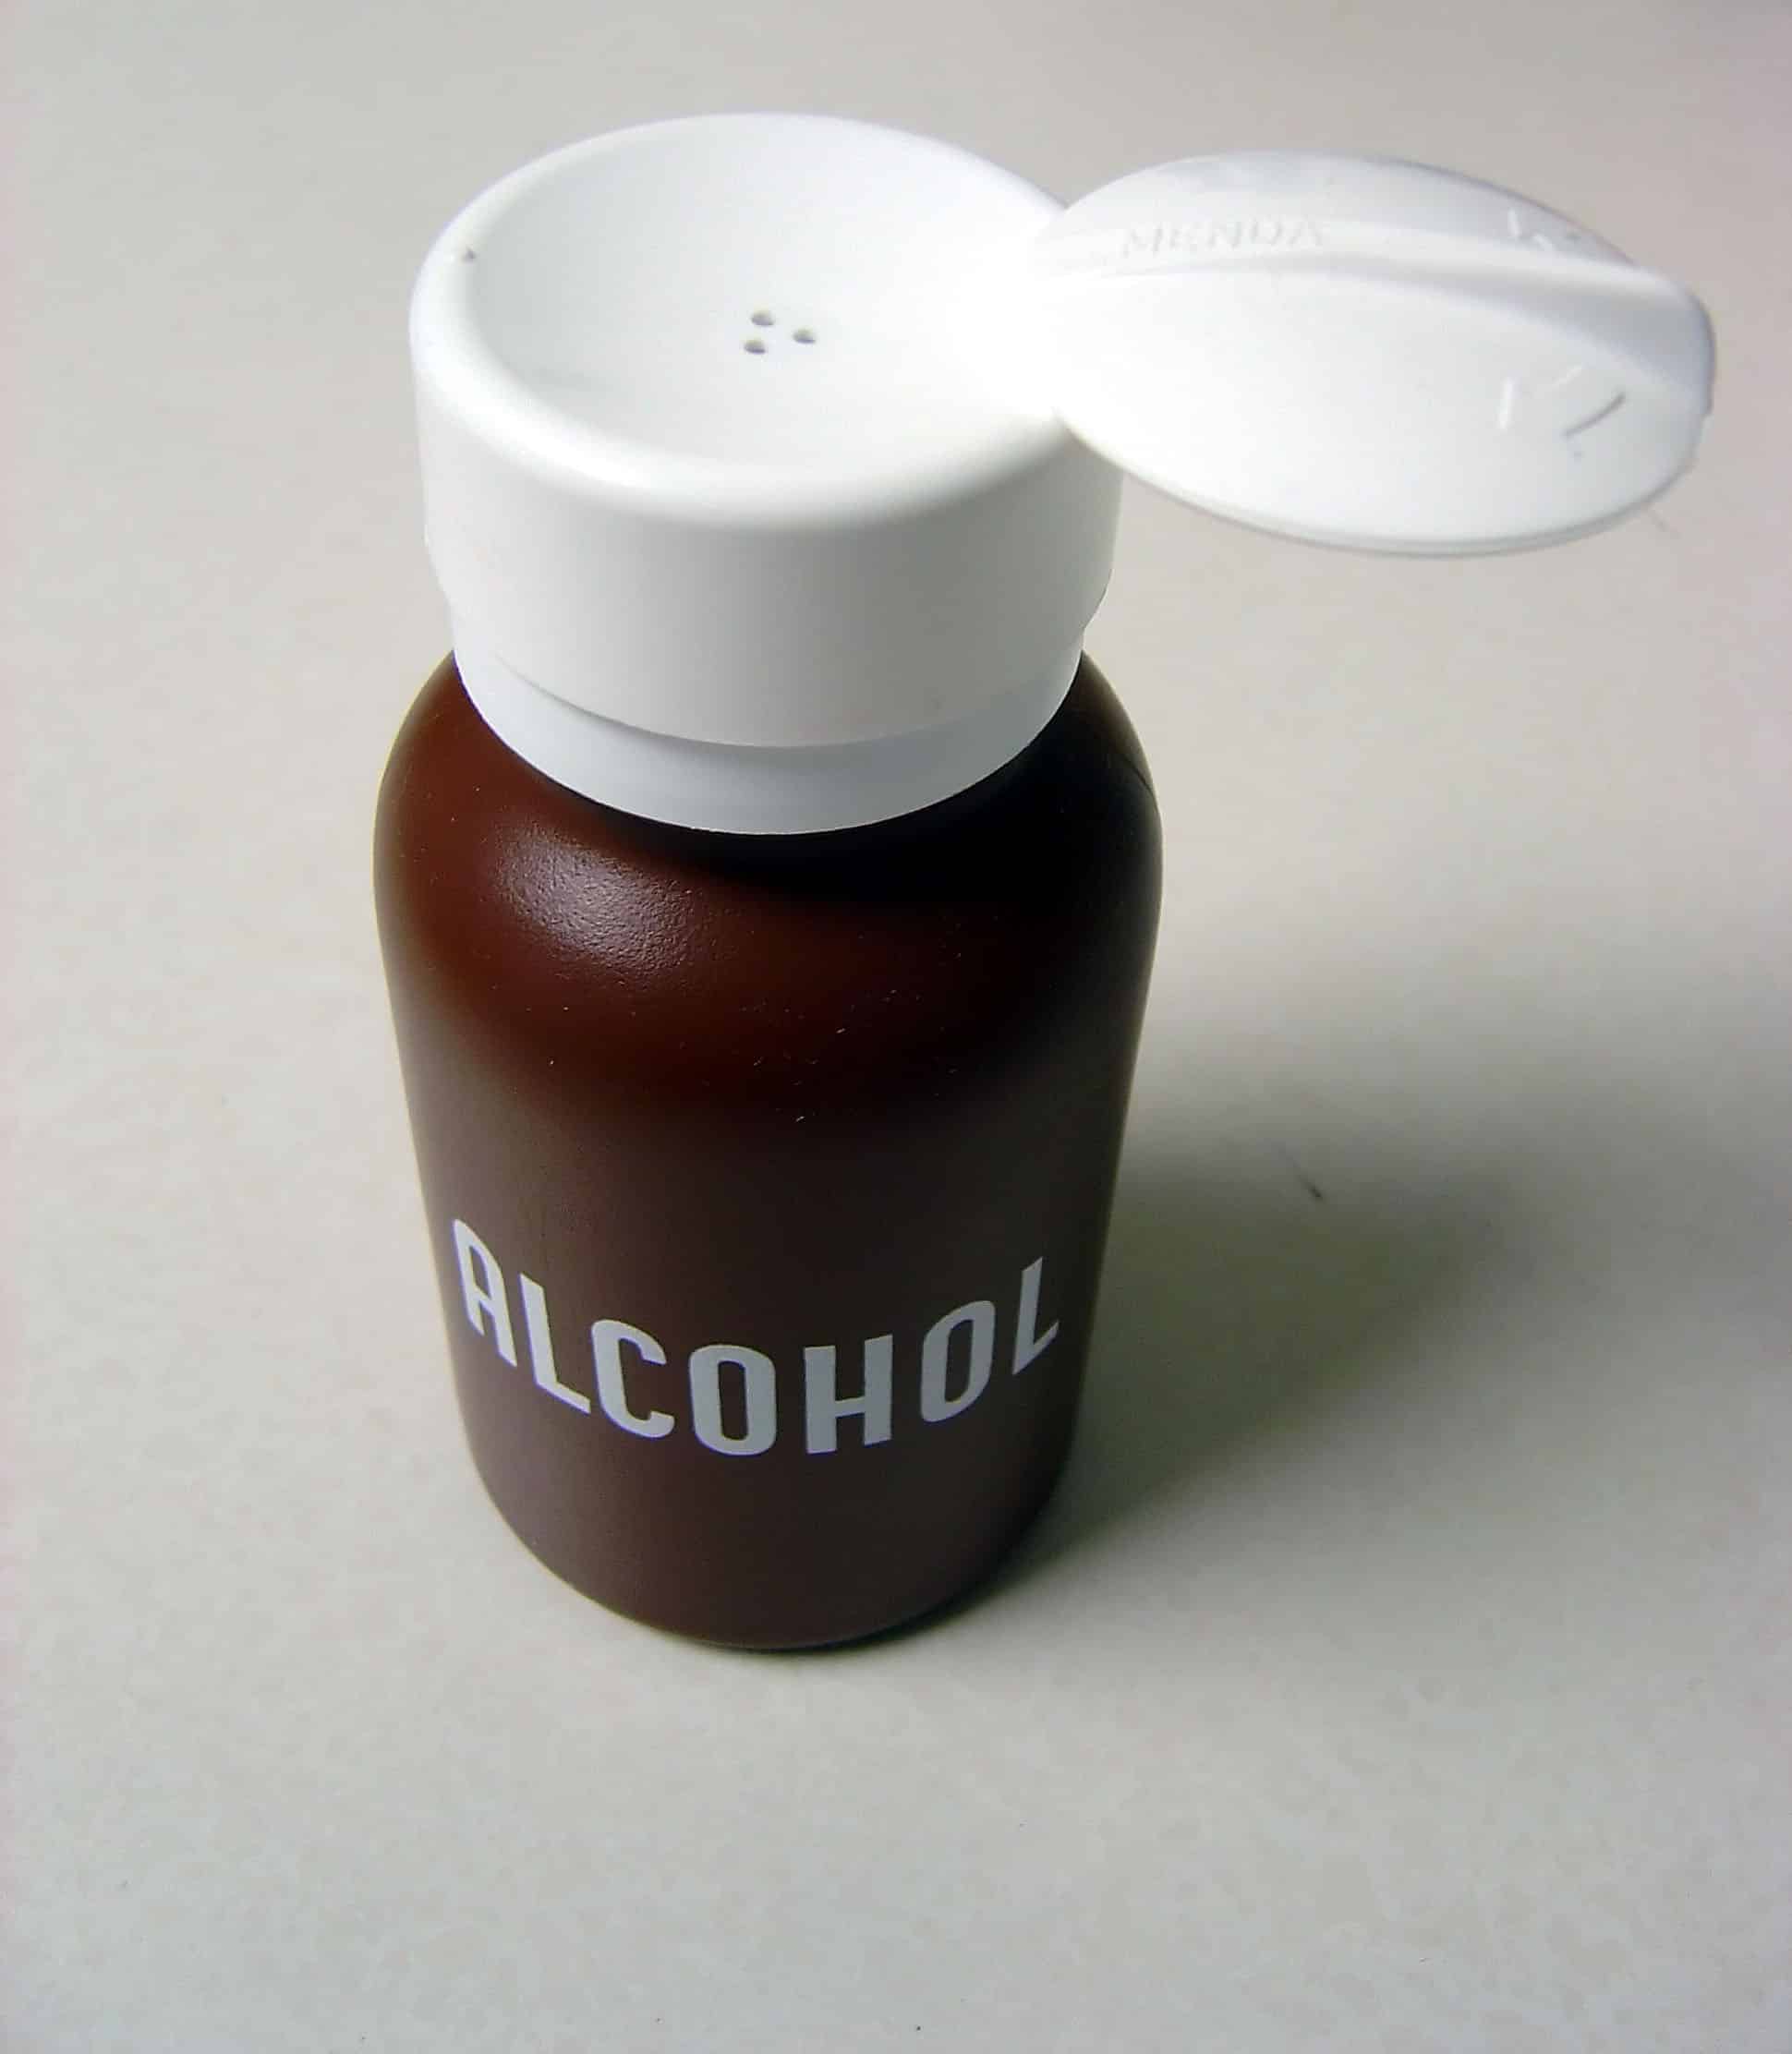 Drinking Rubbing Alcohol, Specifics, Dangers, Risks, Effects, Fatal Outcomes & Treatment Options